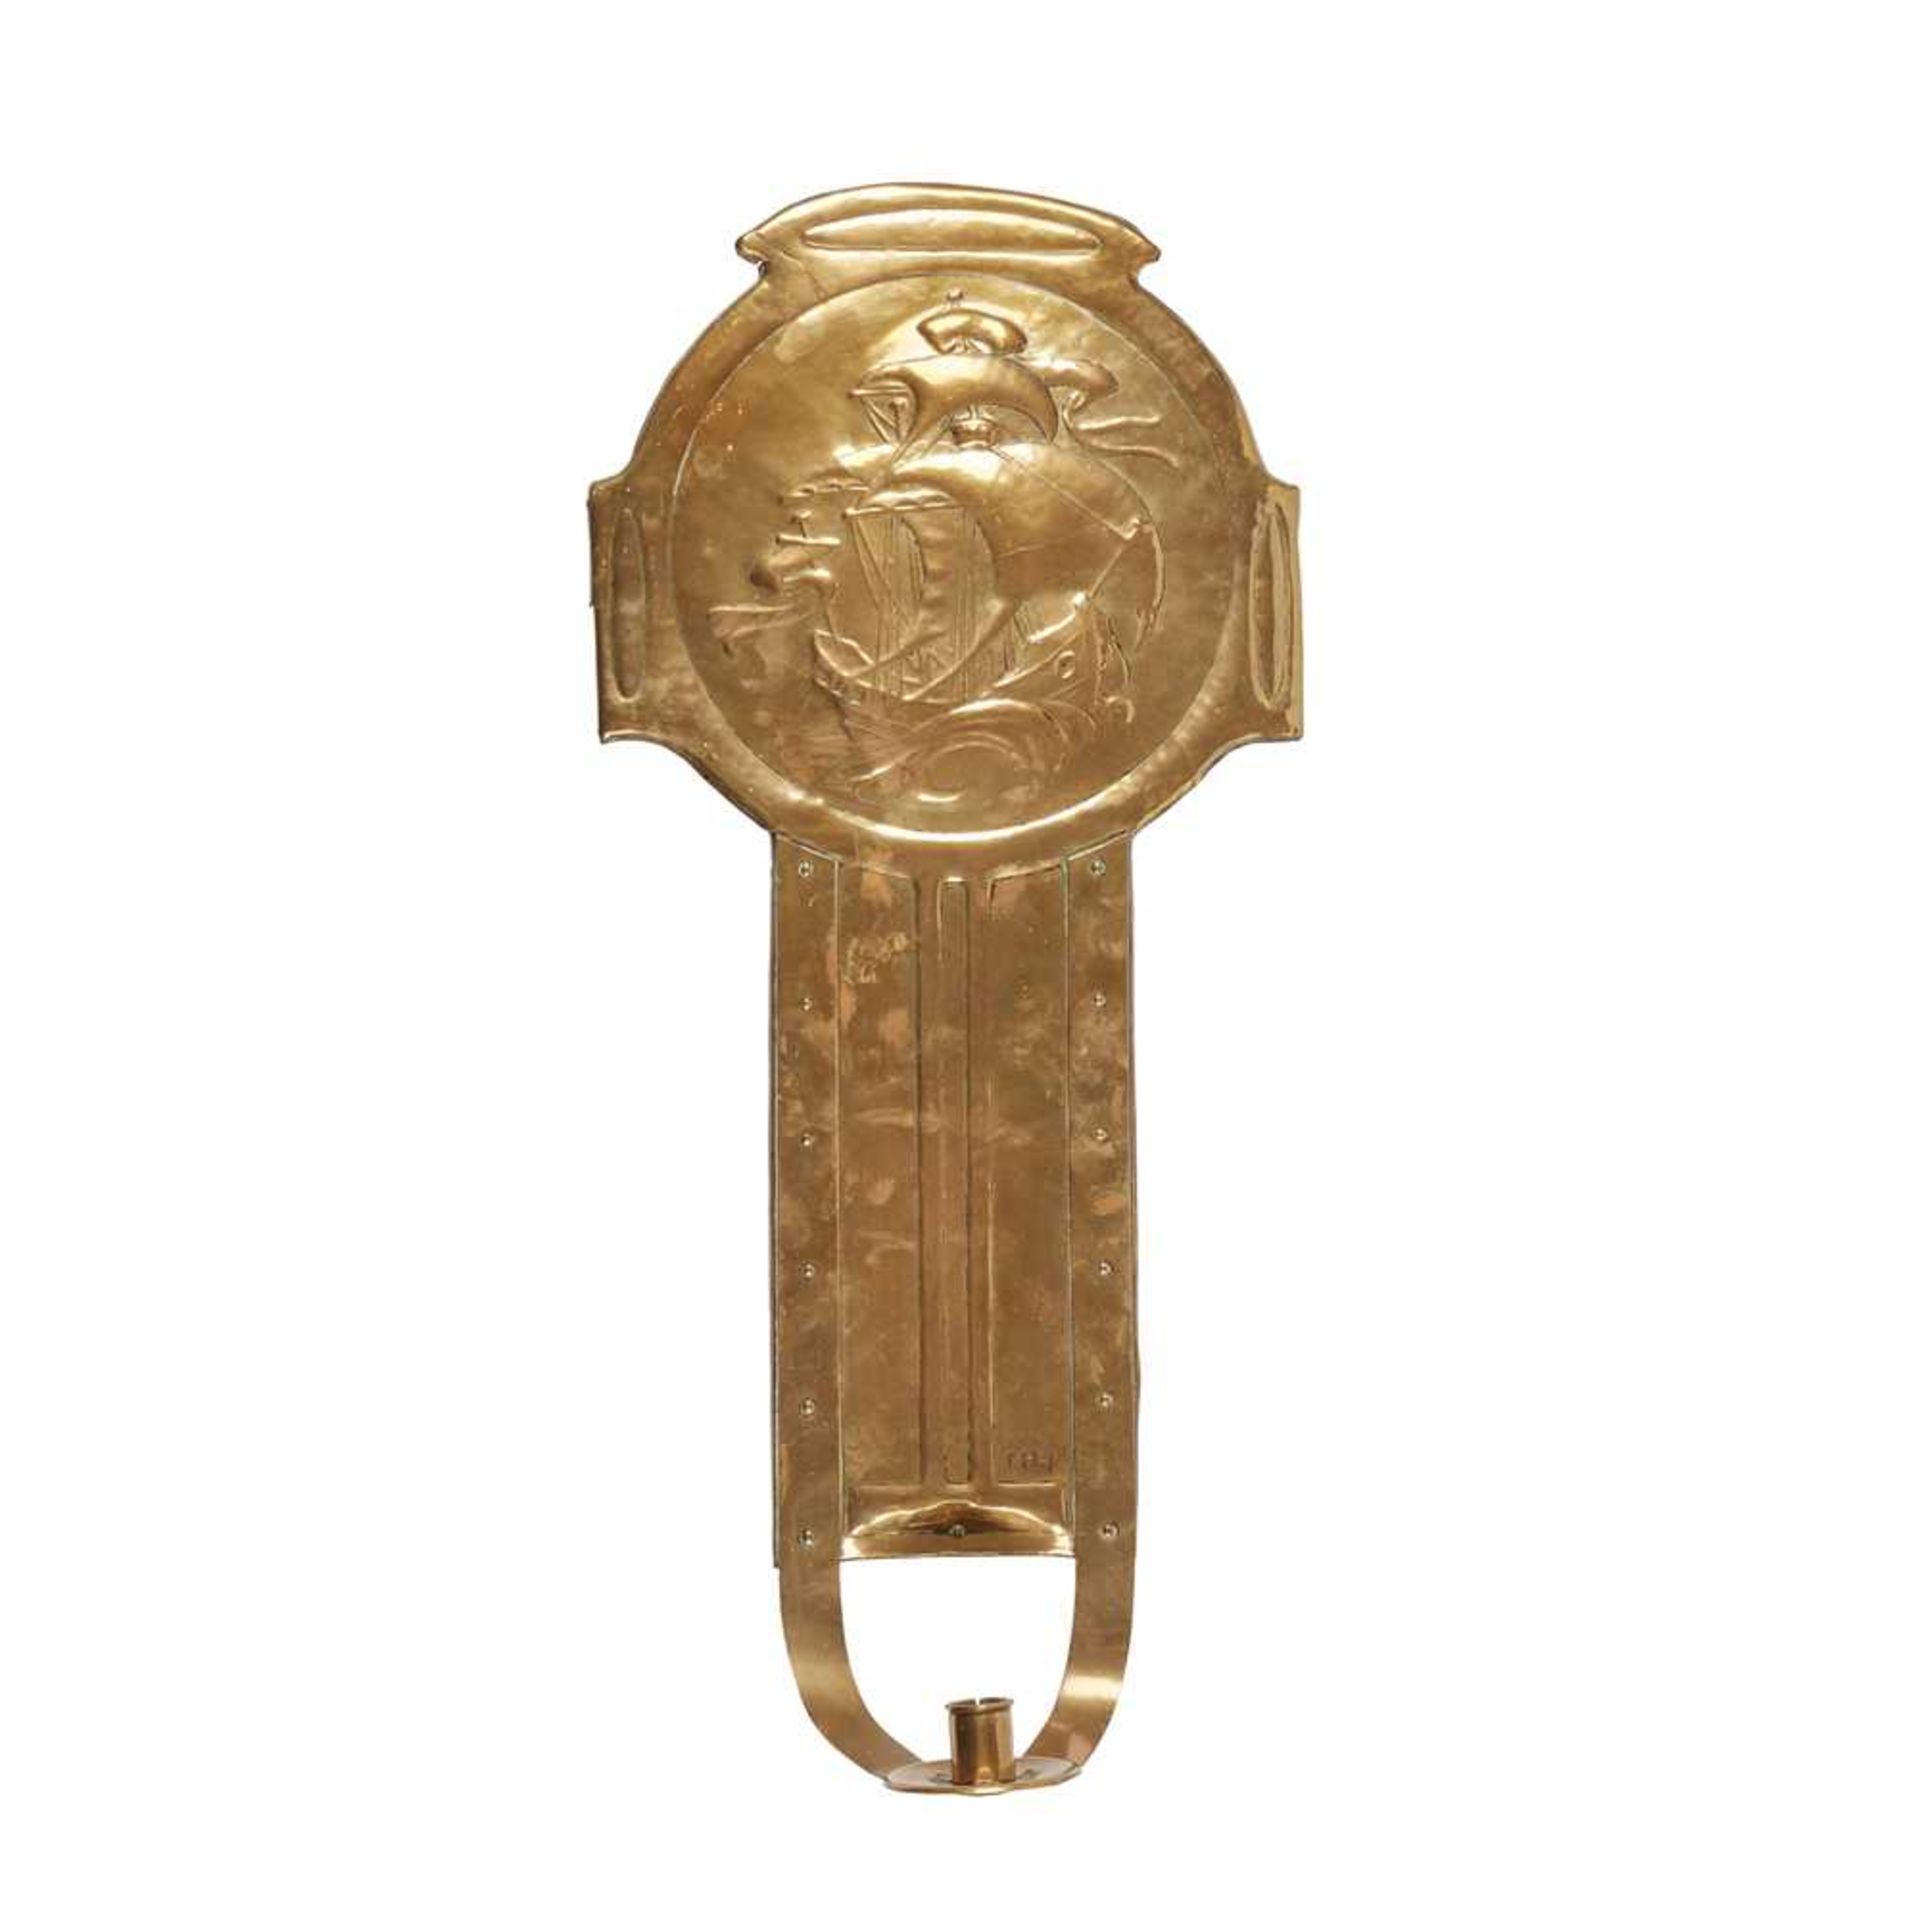 MARION HENDERSON WILSON (1869-1956) BRASS CANDLE SCONCE, CIRCA 1910